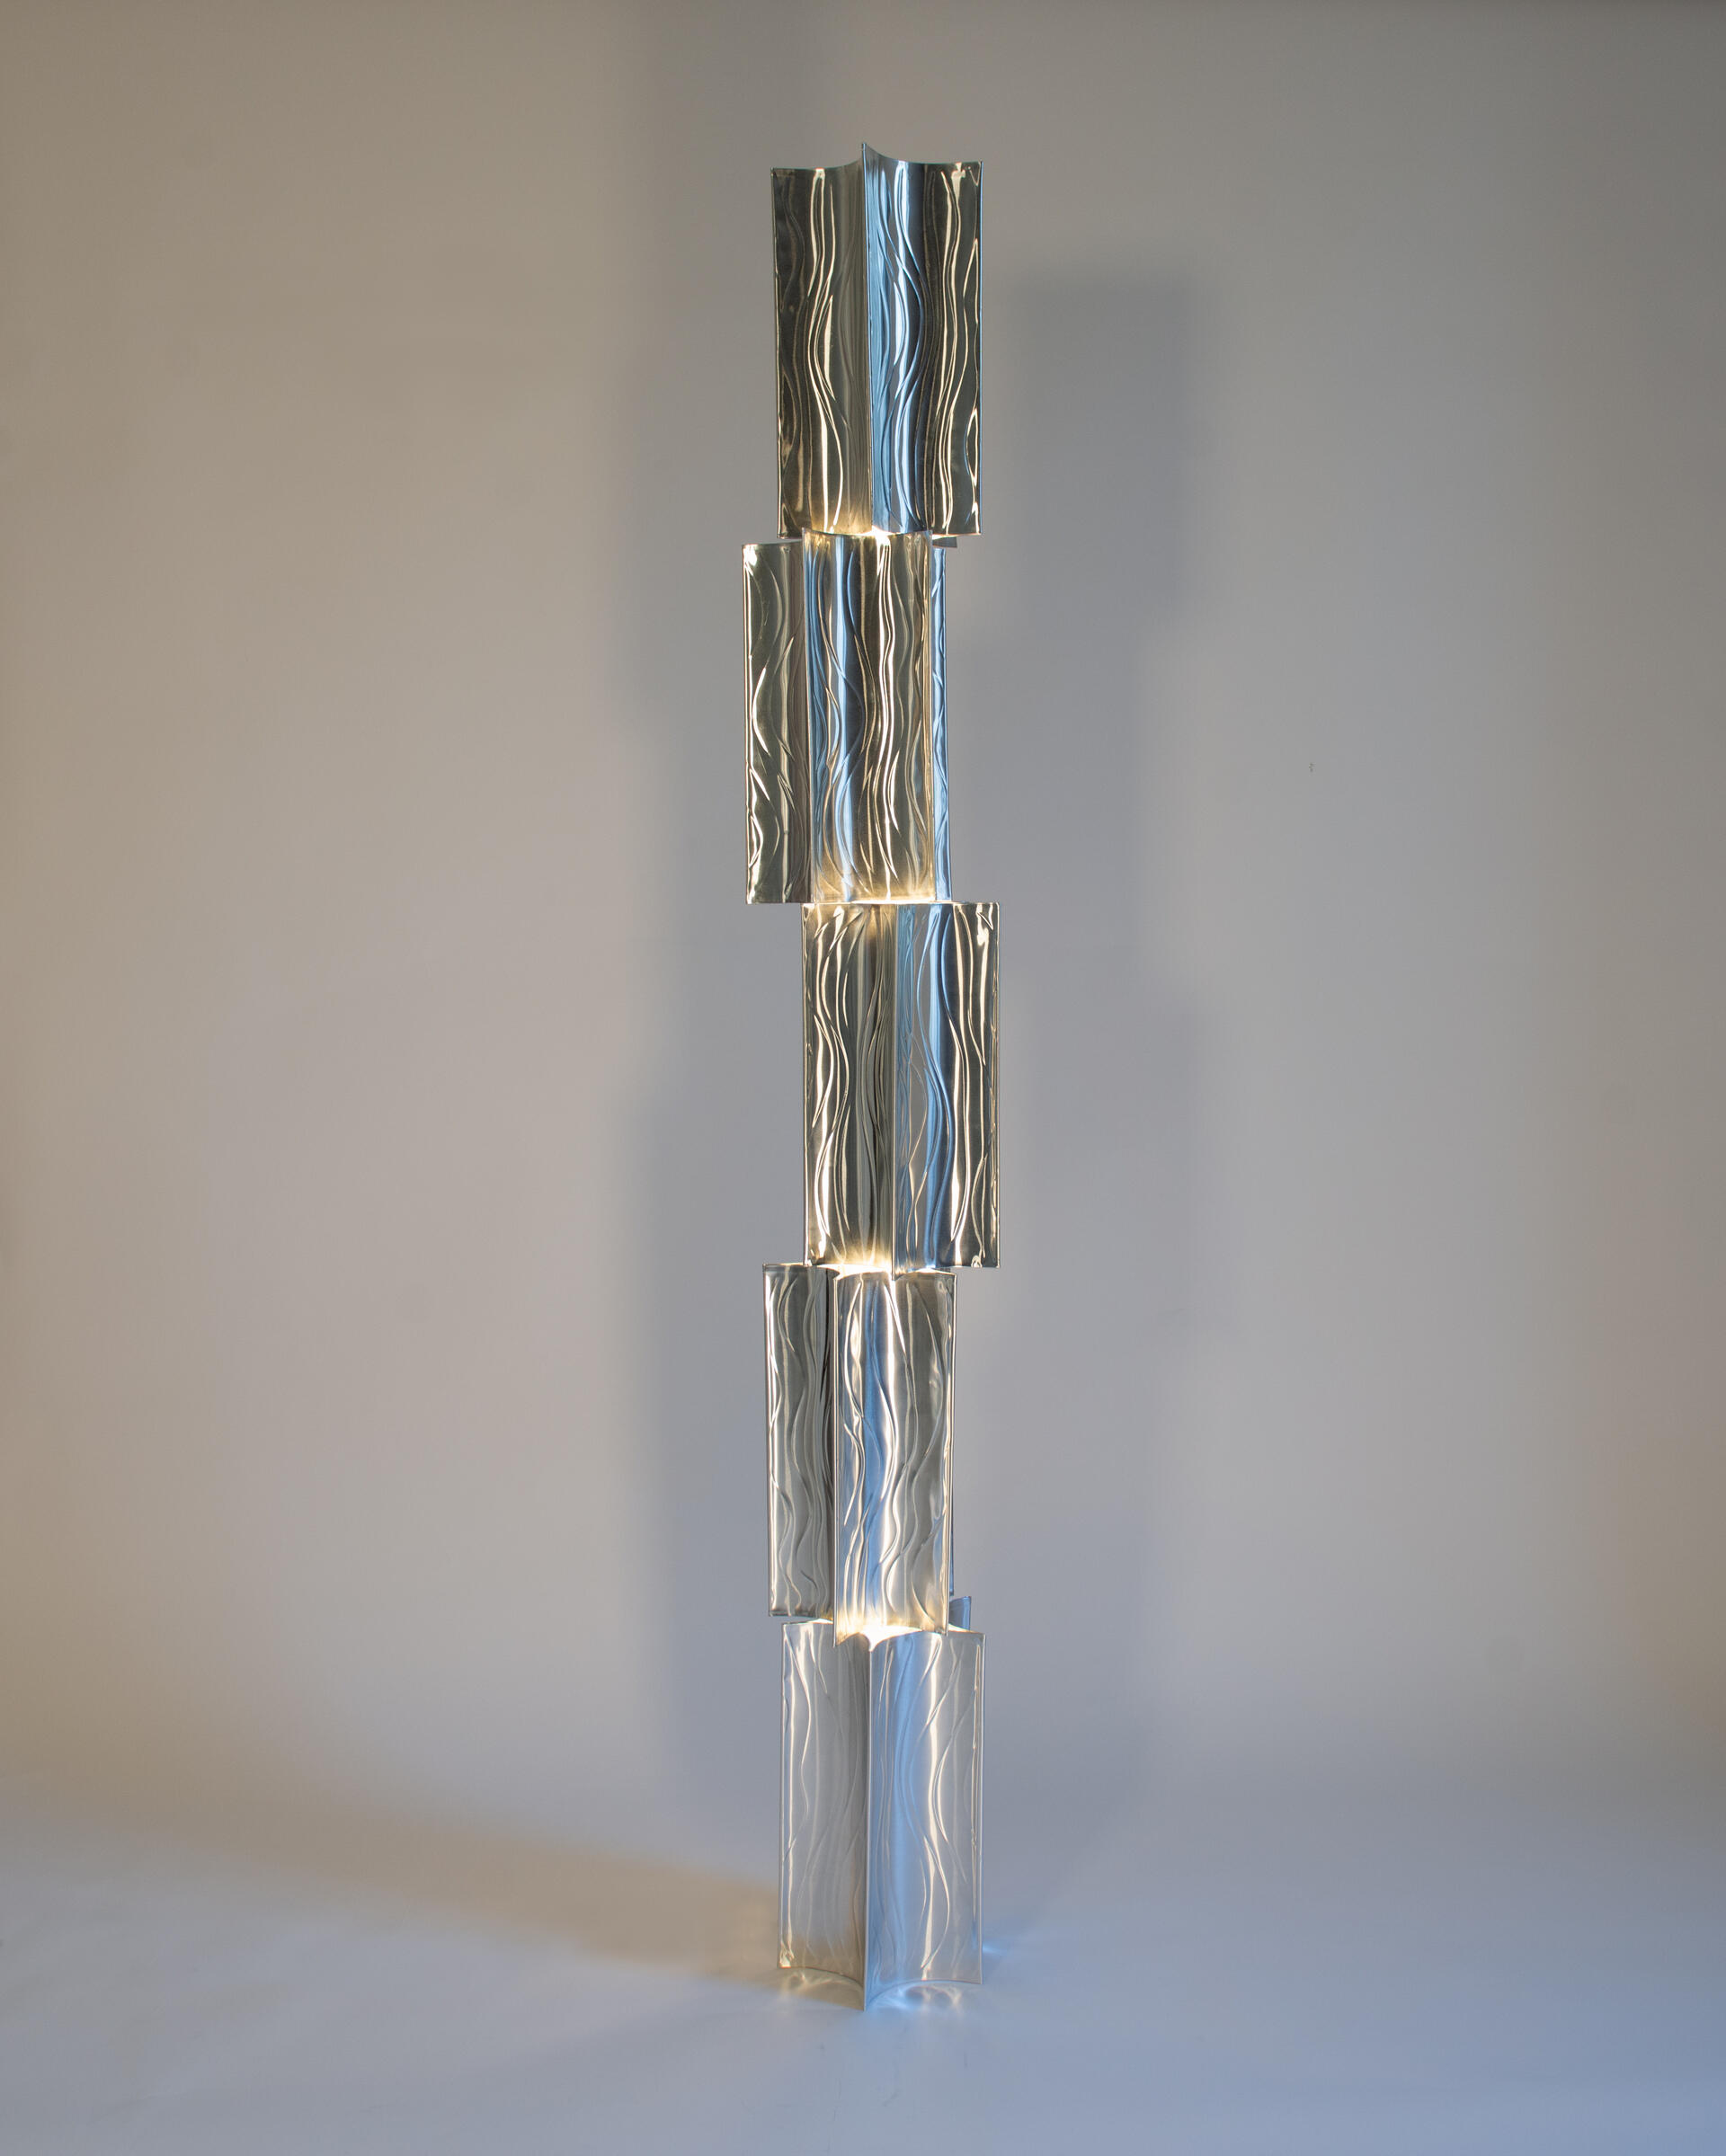 A sleek, modern floor lamp composed of a vertical stack of five aluminum lanterns. Each panel has a wavy texture and emits a subtle, warm light from the edges, creating a cascading effect.